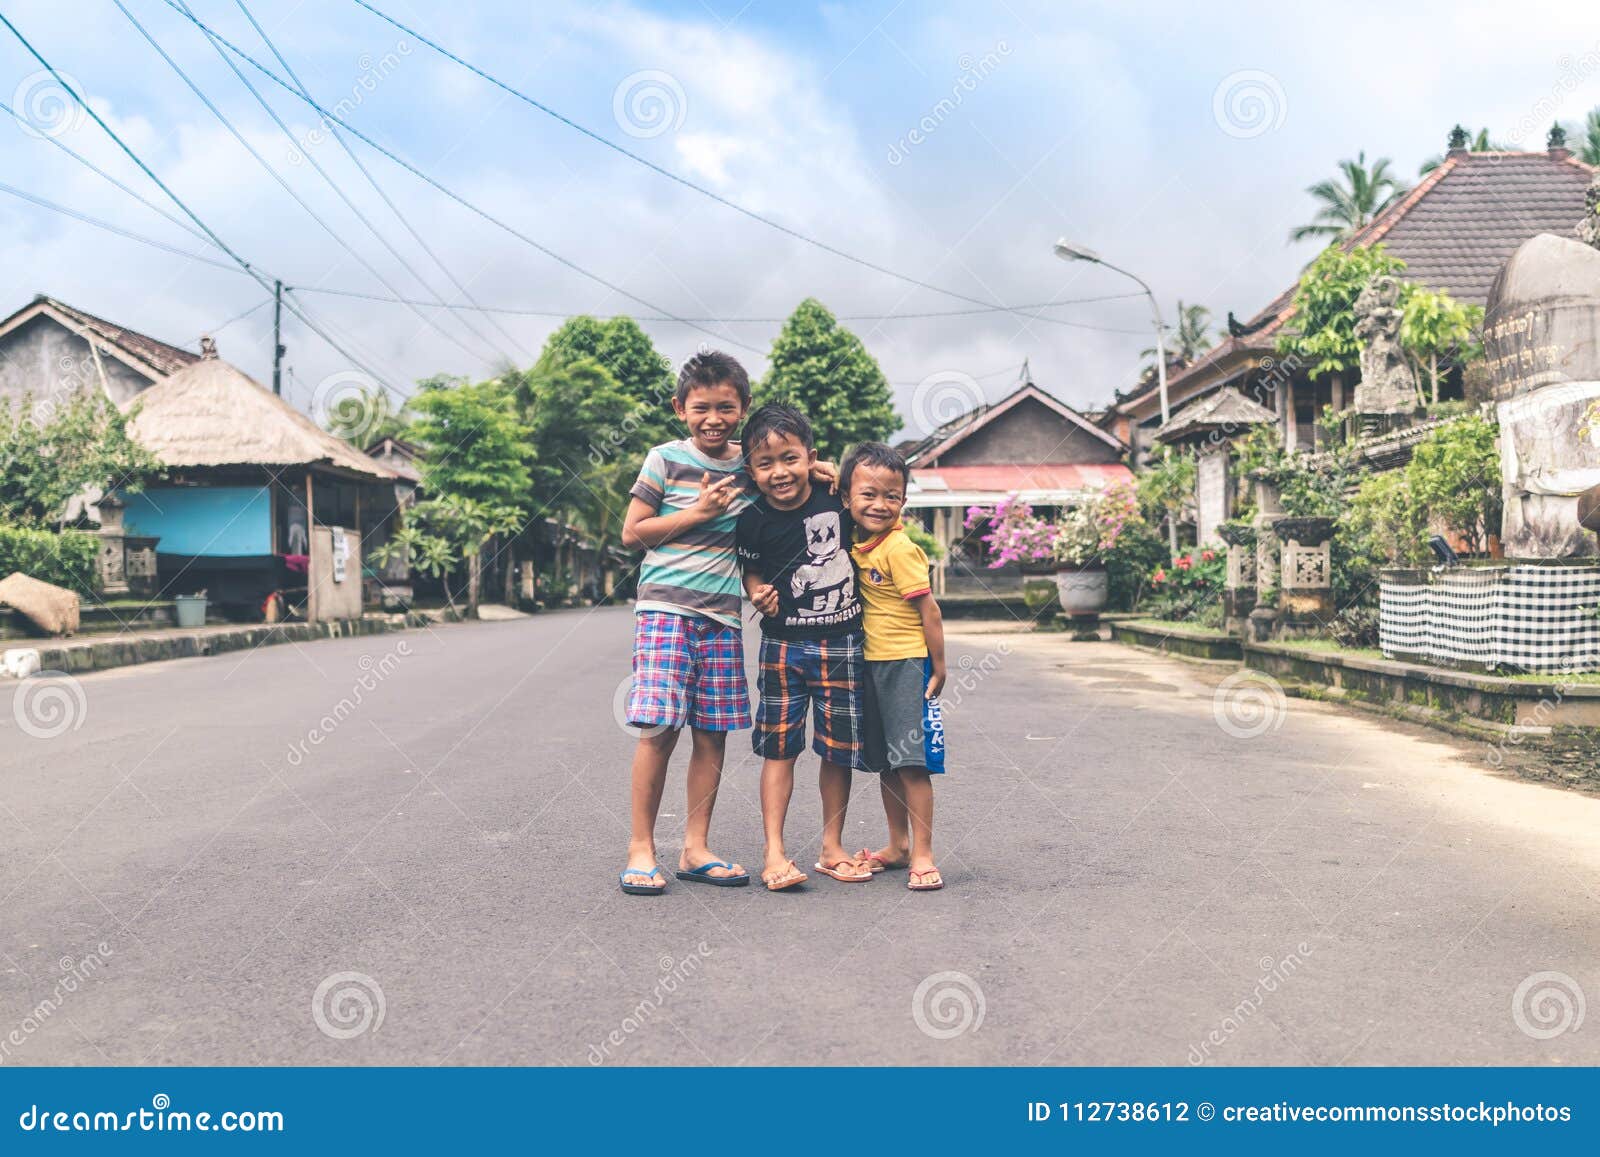 Indian School Girl Class 10 Xxx Video Wapking - Three Boys Standing On Road Picture. Image: 112738612